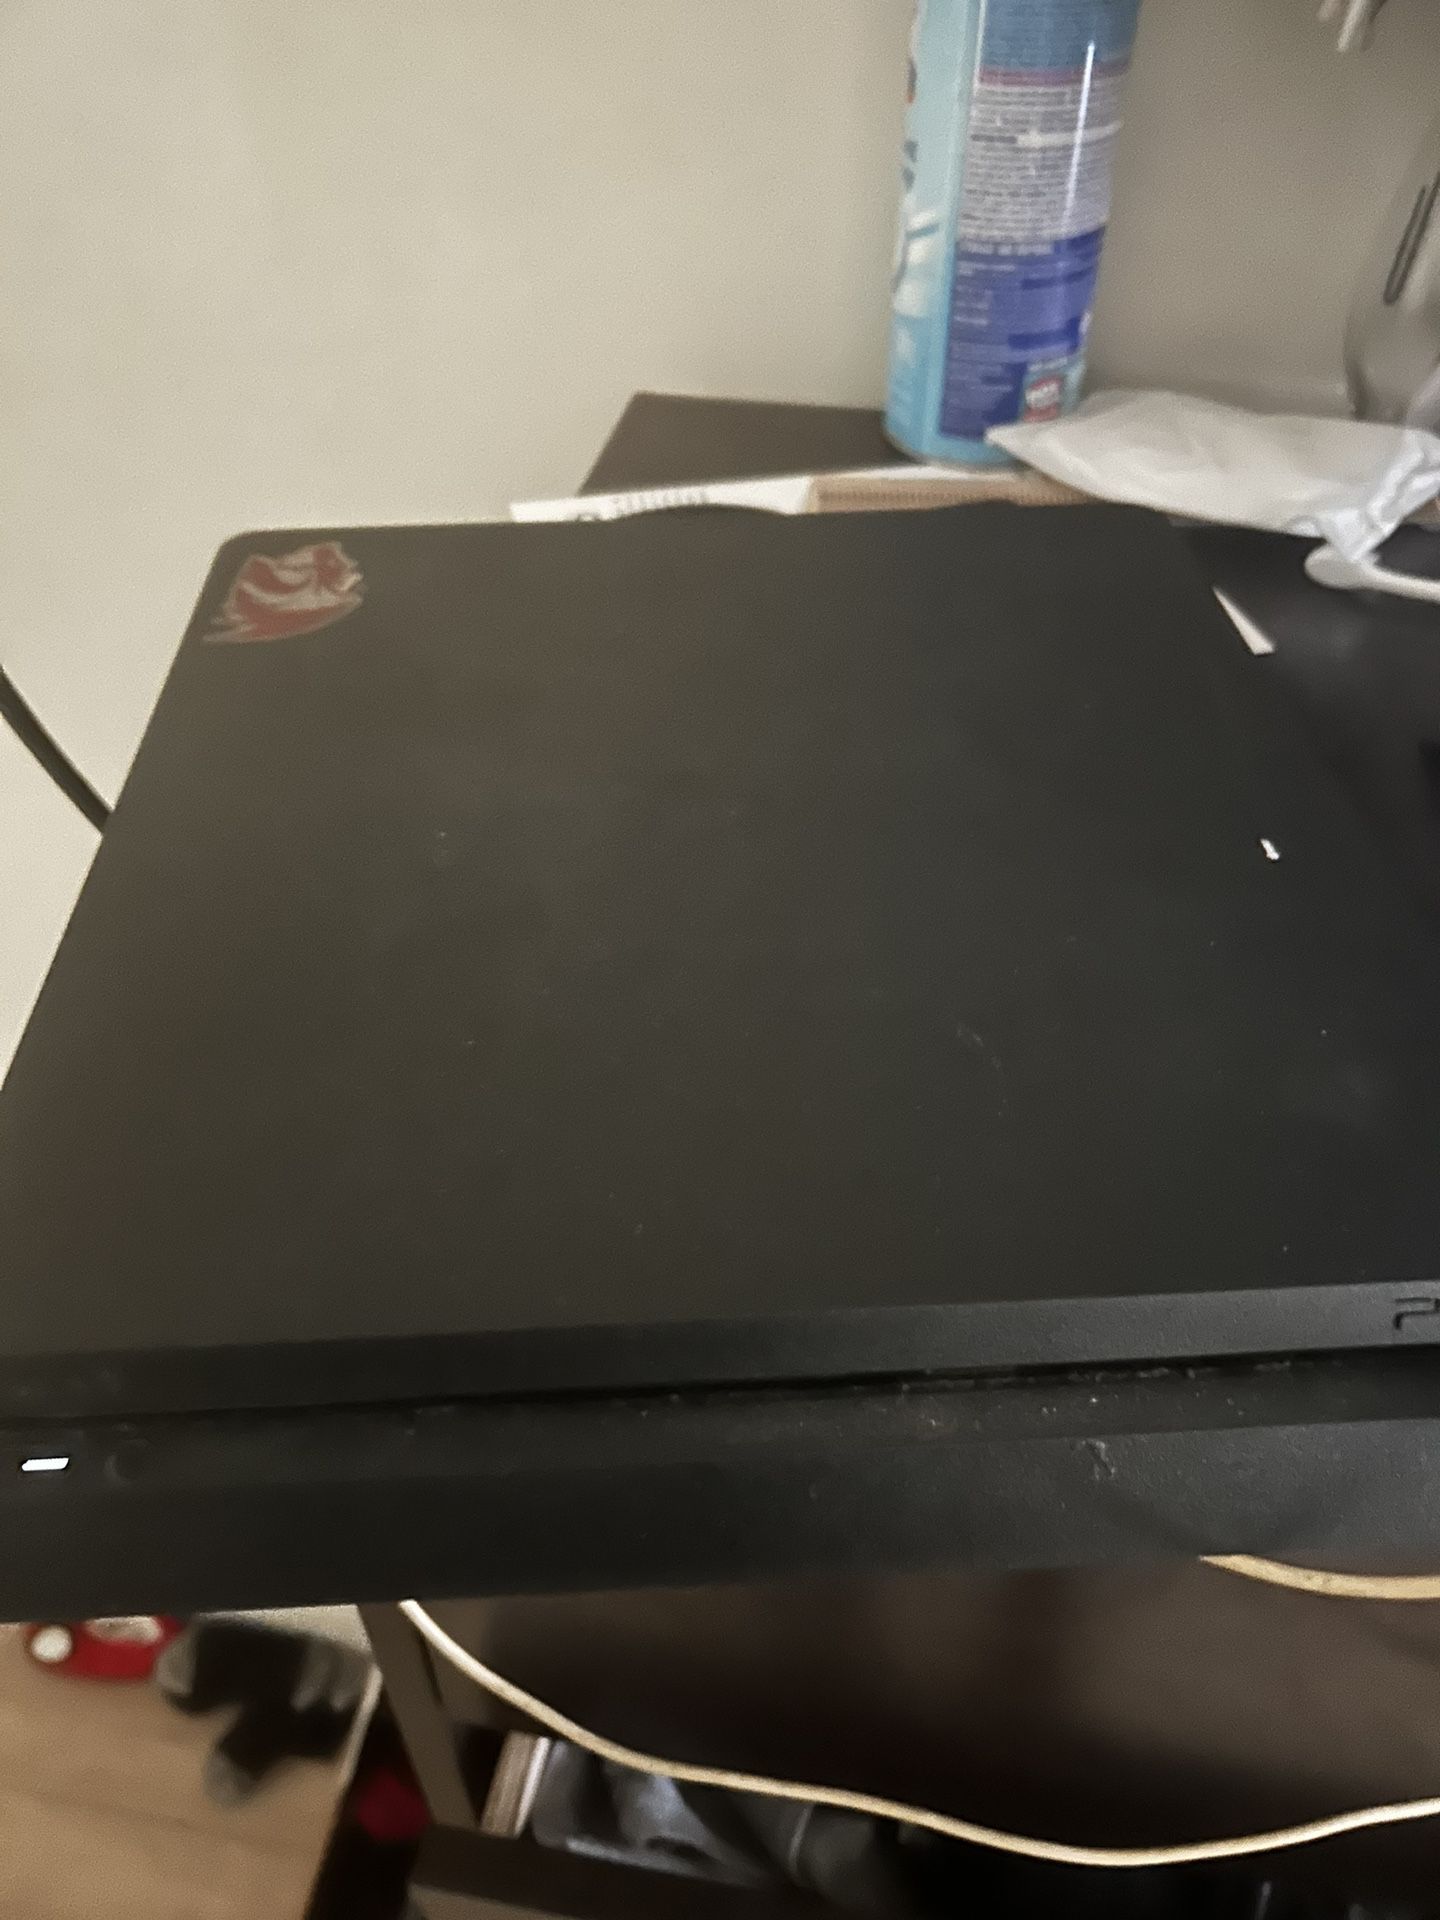 Ps4 Slim With 2 Controllers